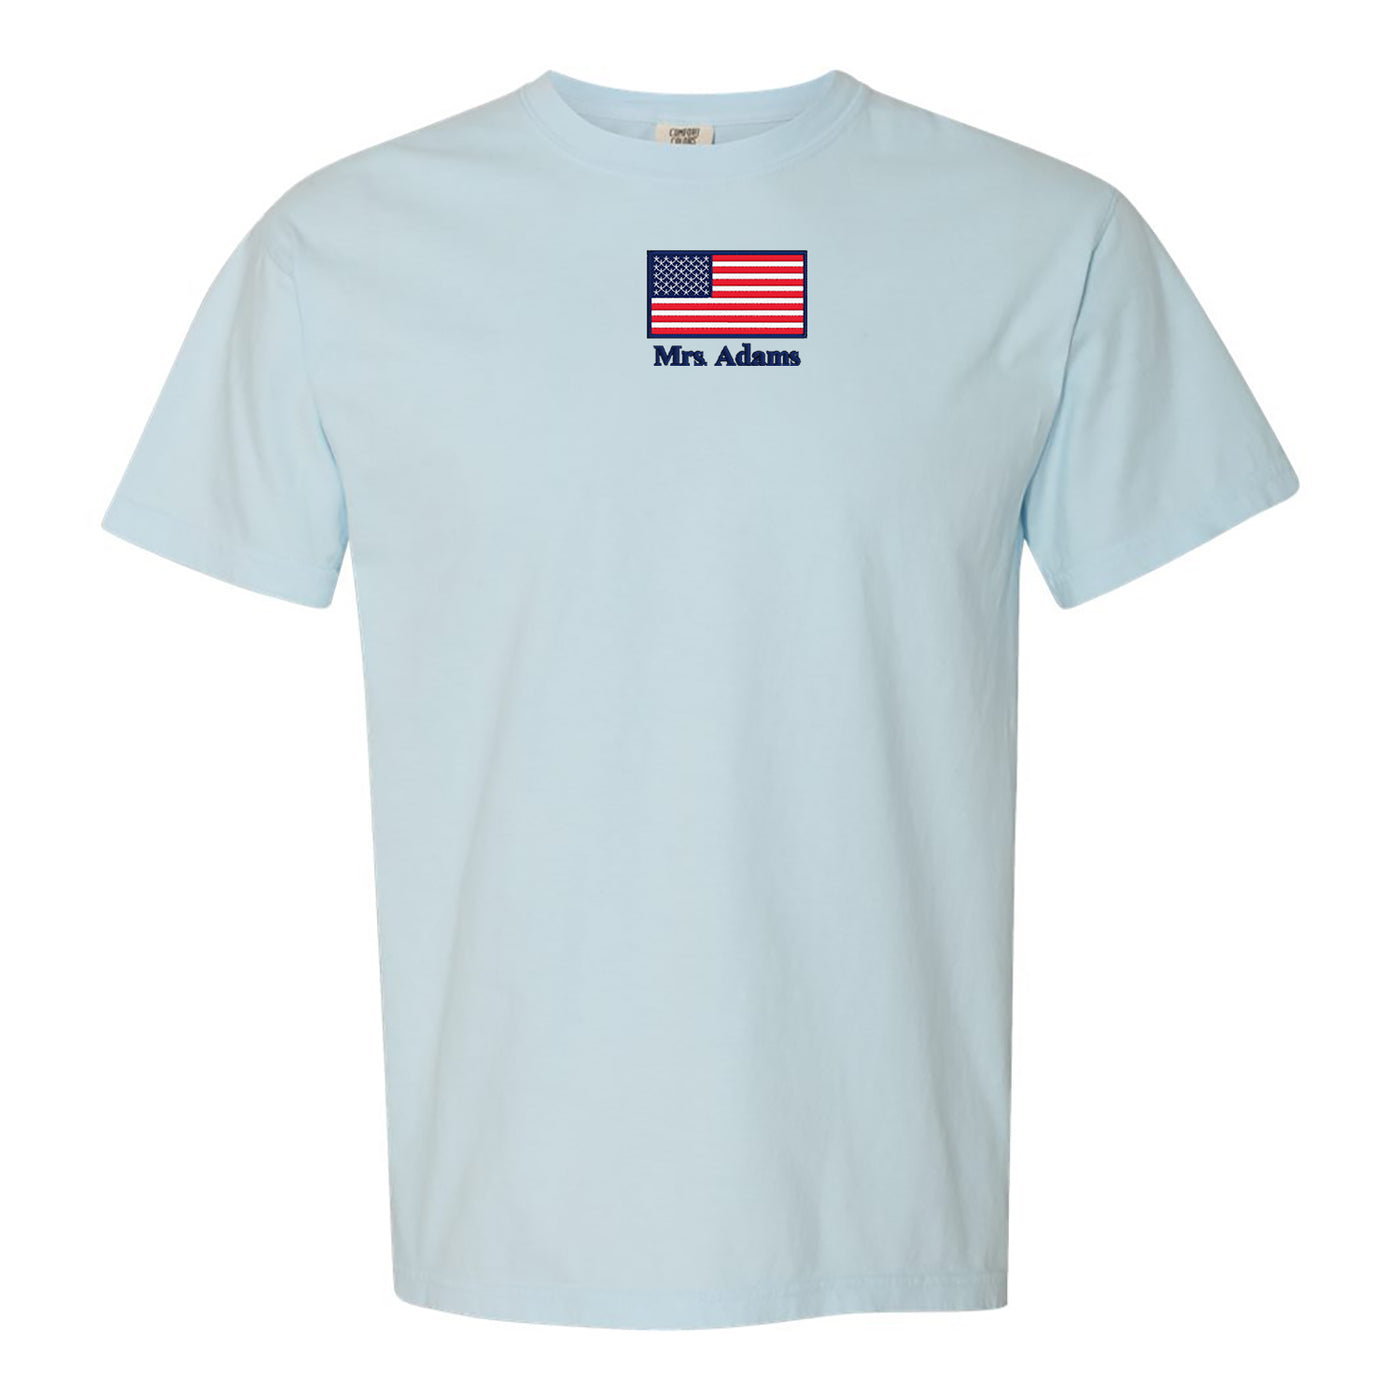 Make it Yours™ 'American Flag' Comfort Colors T-Shirt